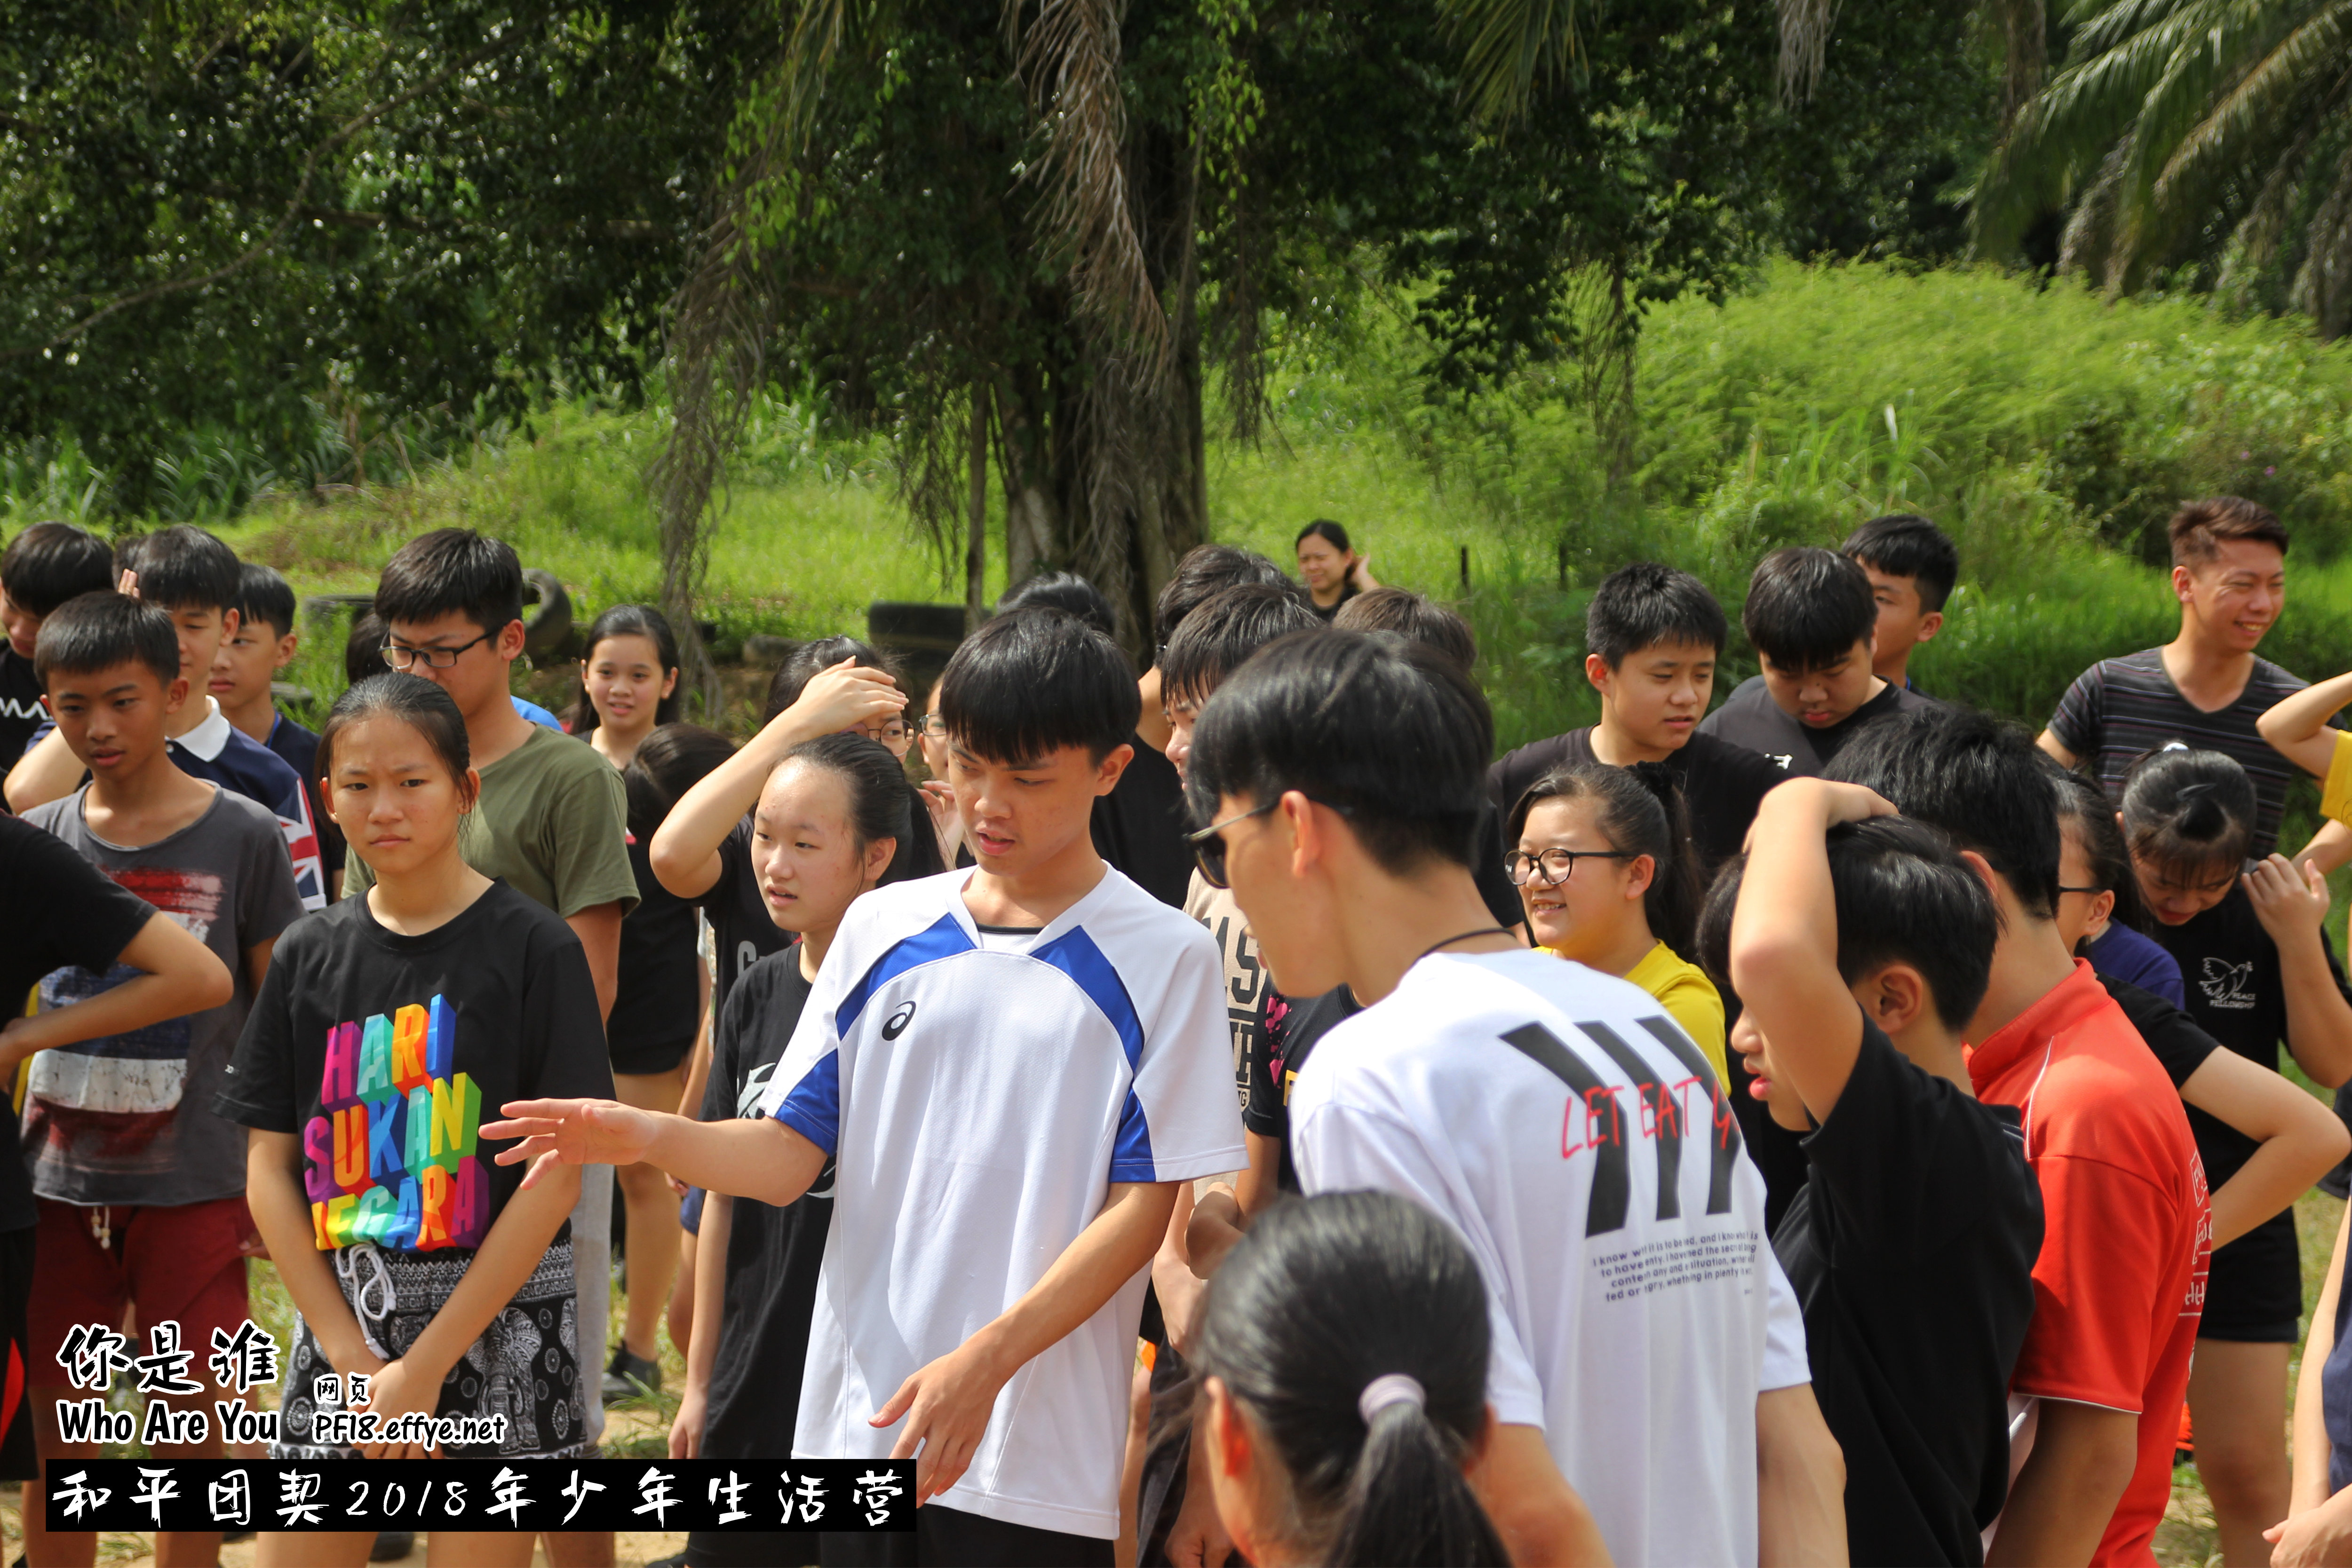 Peace Fellowship Youth Camp 2018 Who Are You 和平团契 2018 年少年生活营 你是谁 A002-007